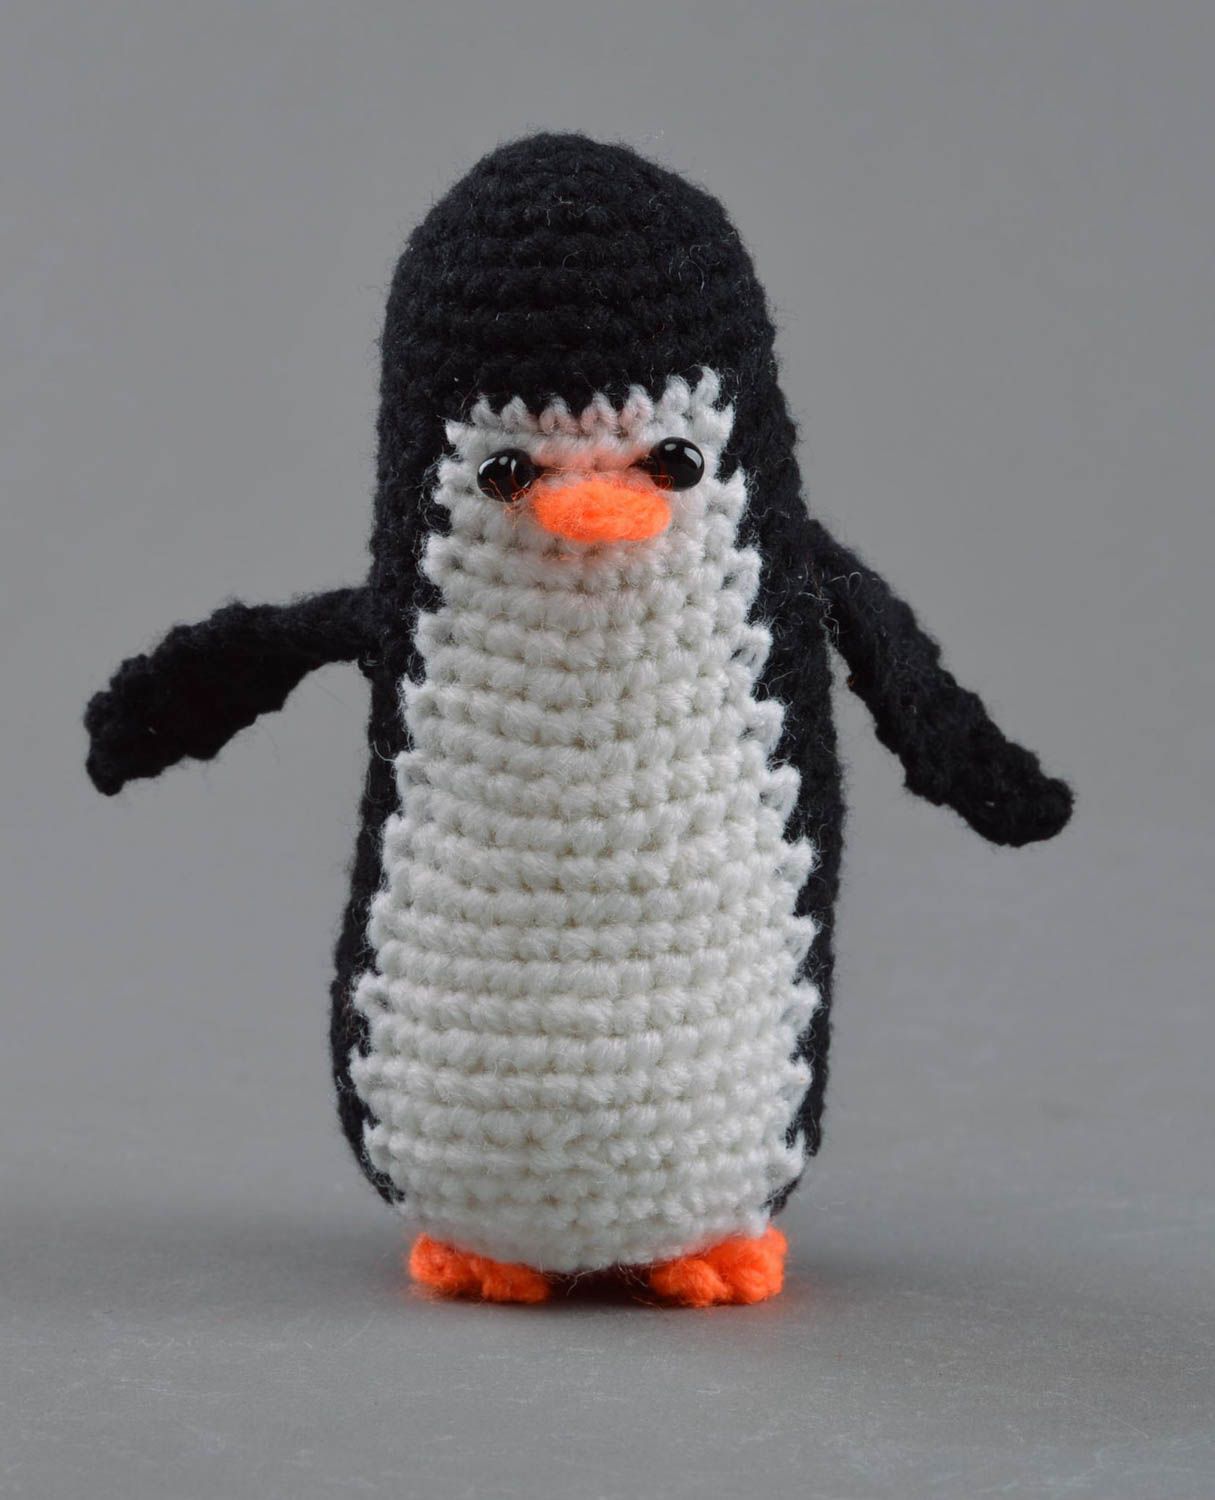 Handmade crocheted penguin small cute black and white toy for children photo 1